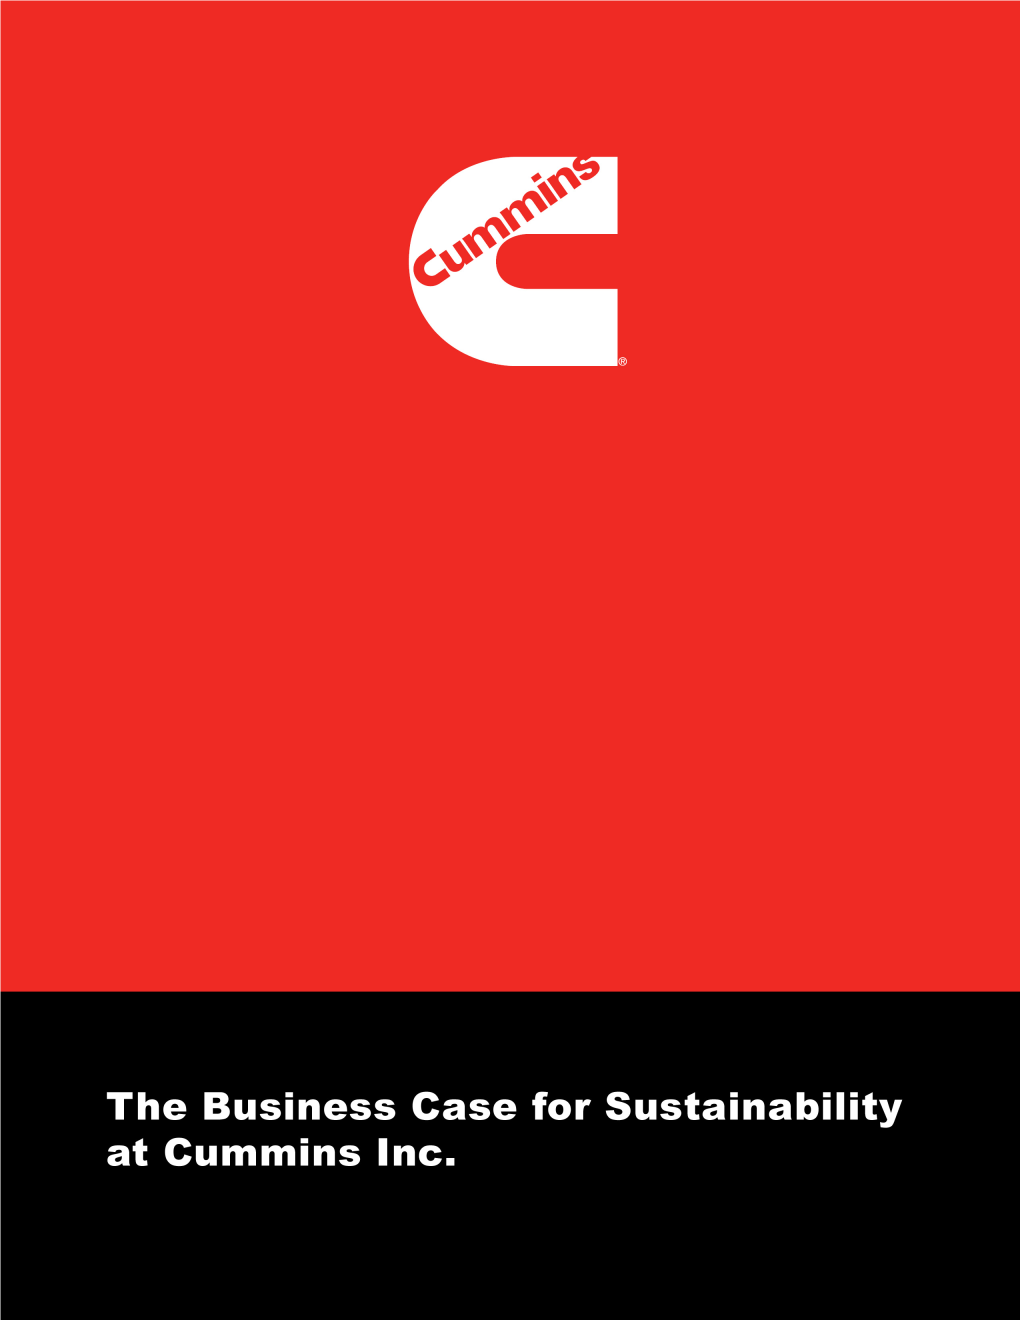 The Business Case for Sustainability at Cummins Inc